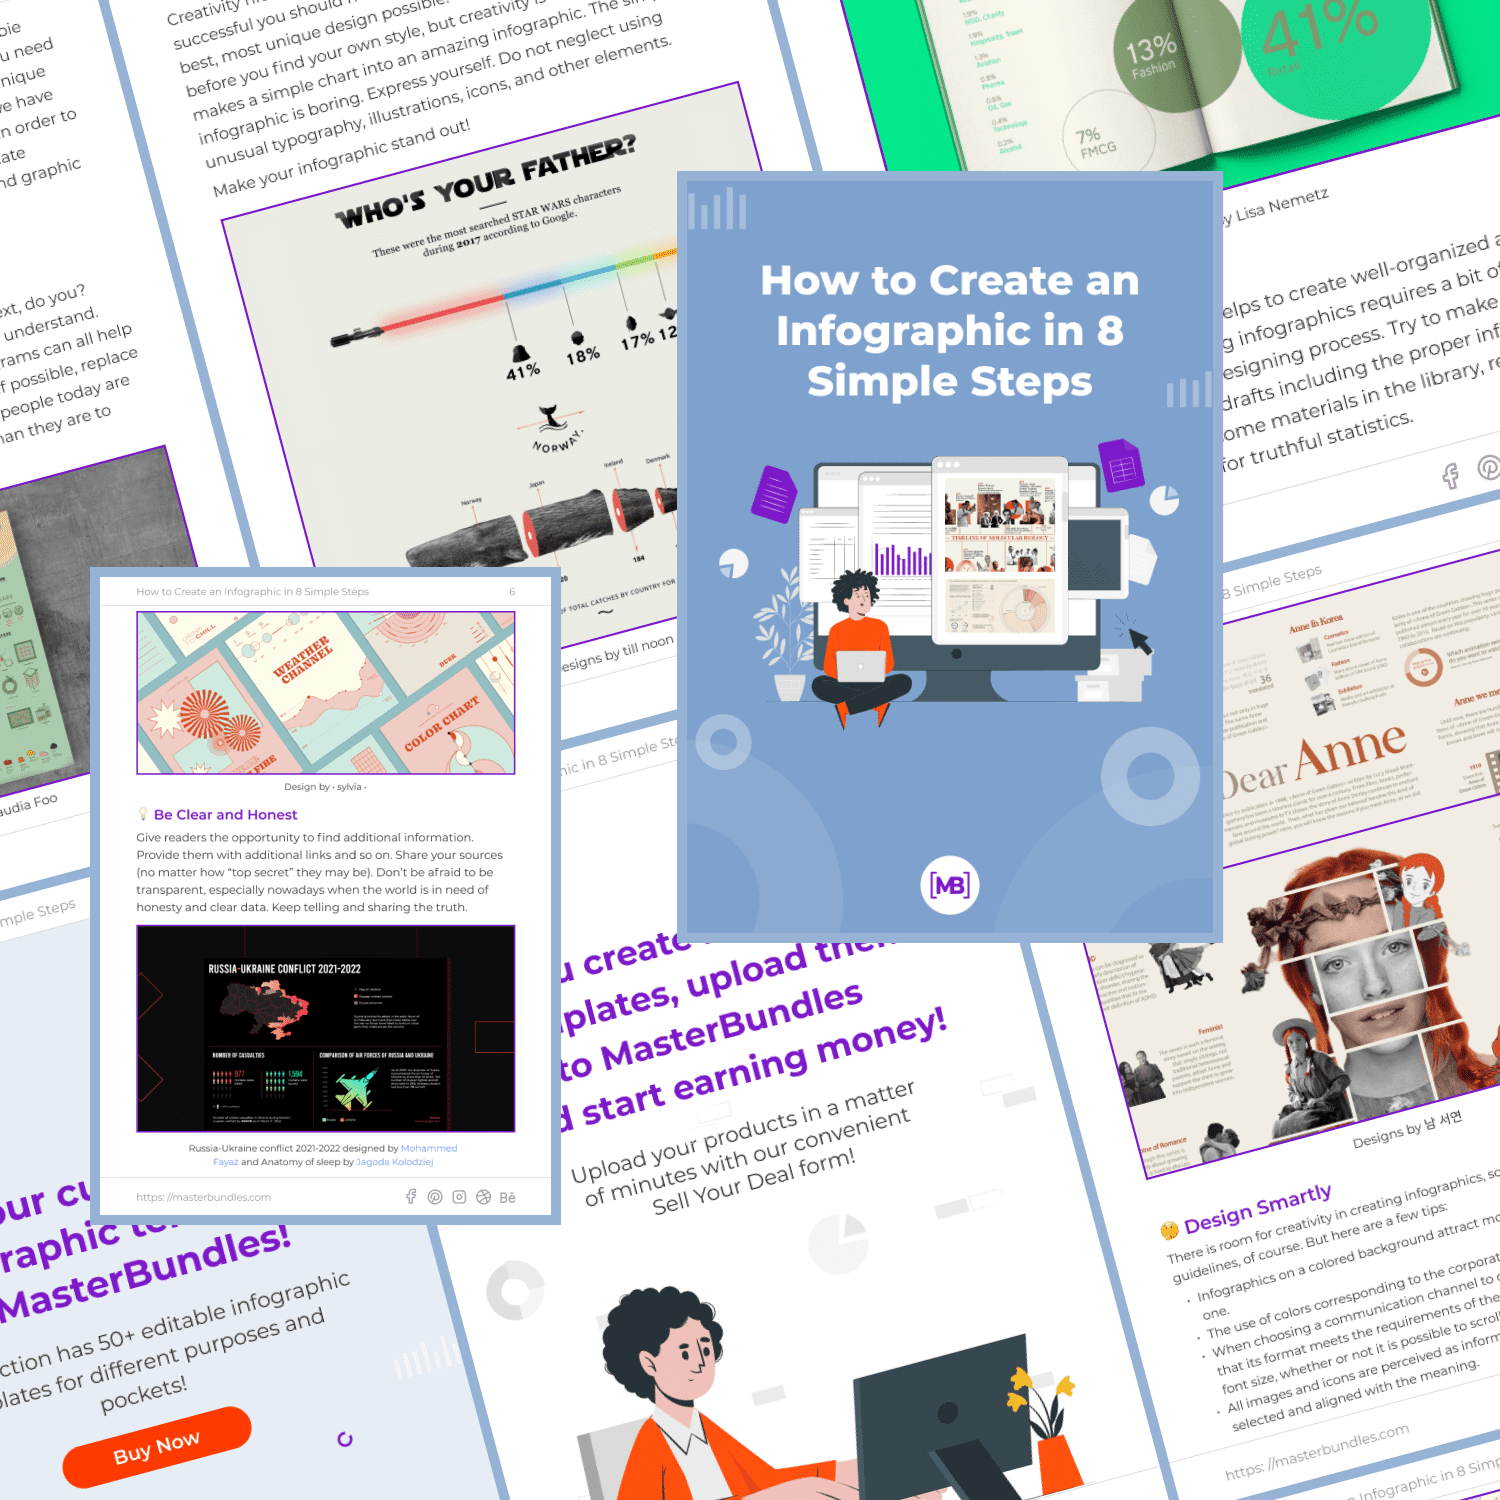 How to Create an Infographic in 8 Simple Steps cover.